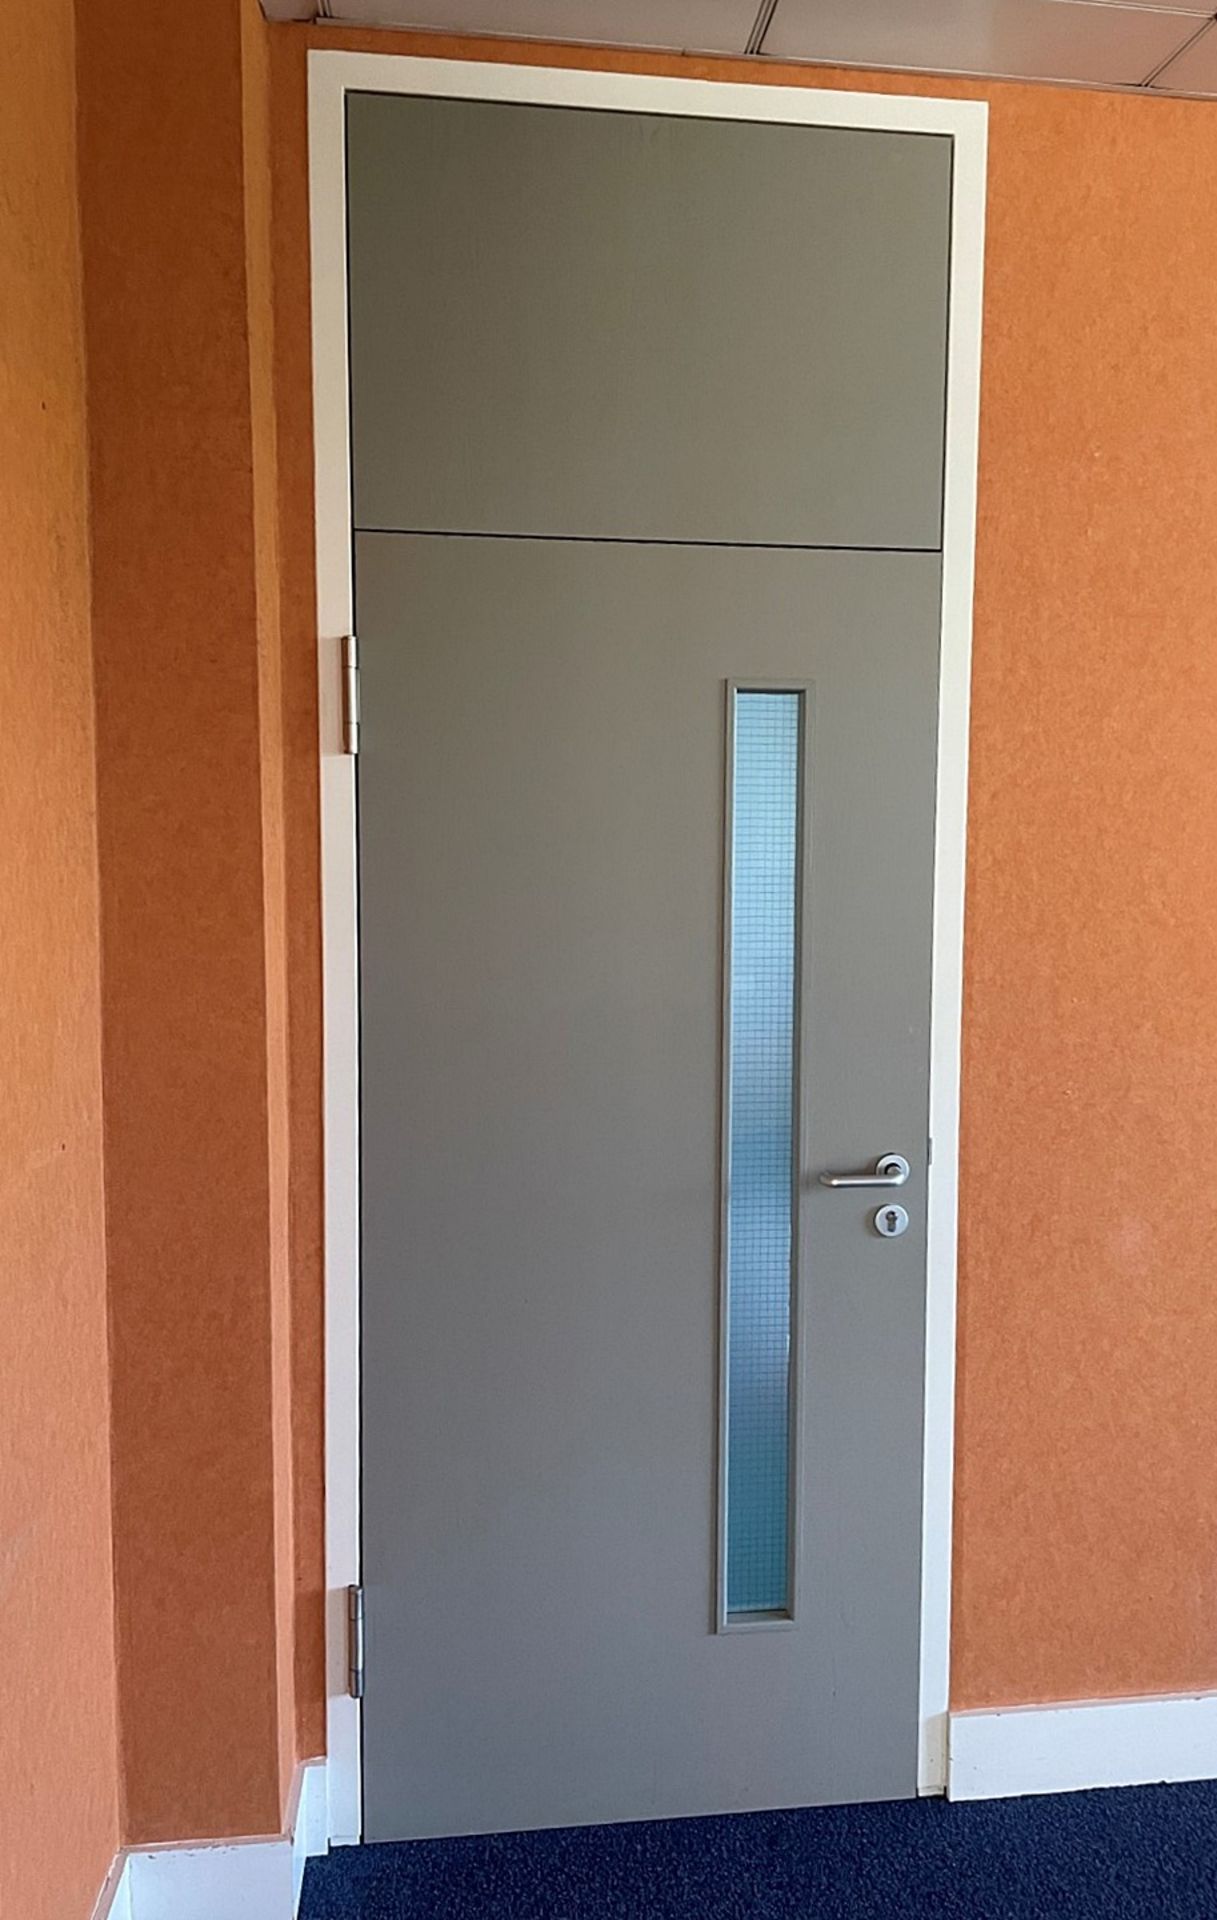 1 x Office Door With Frame And Top Panel - Dimensions: H265 x W99cm - Ref: ED168 - To Be Removed